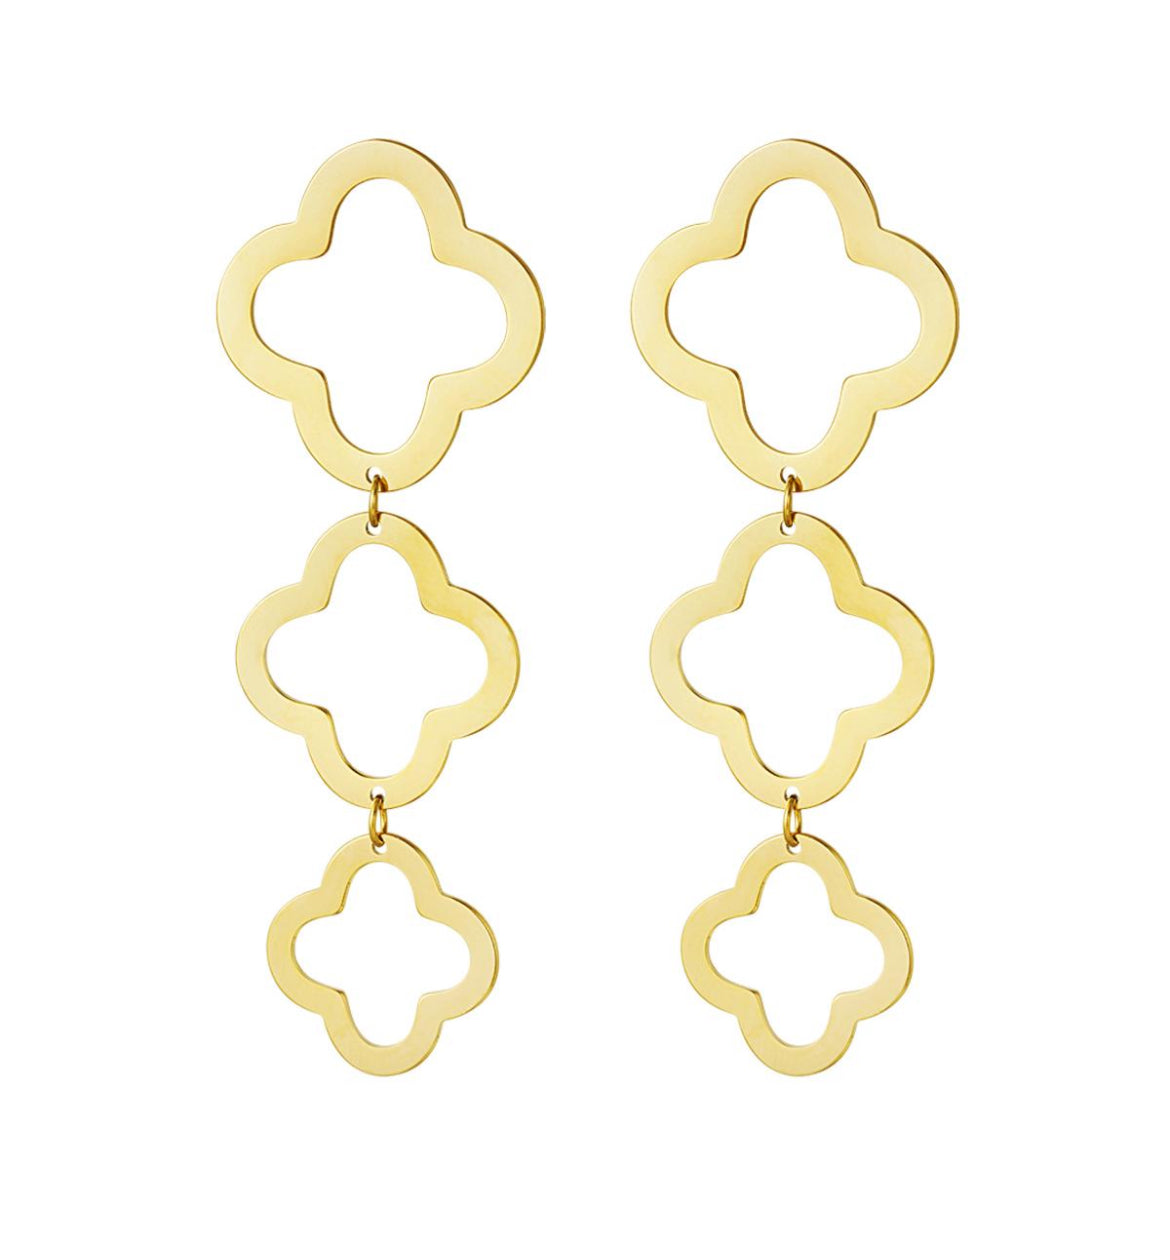 Becca Earring Stainless Steel Clovers Statement